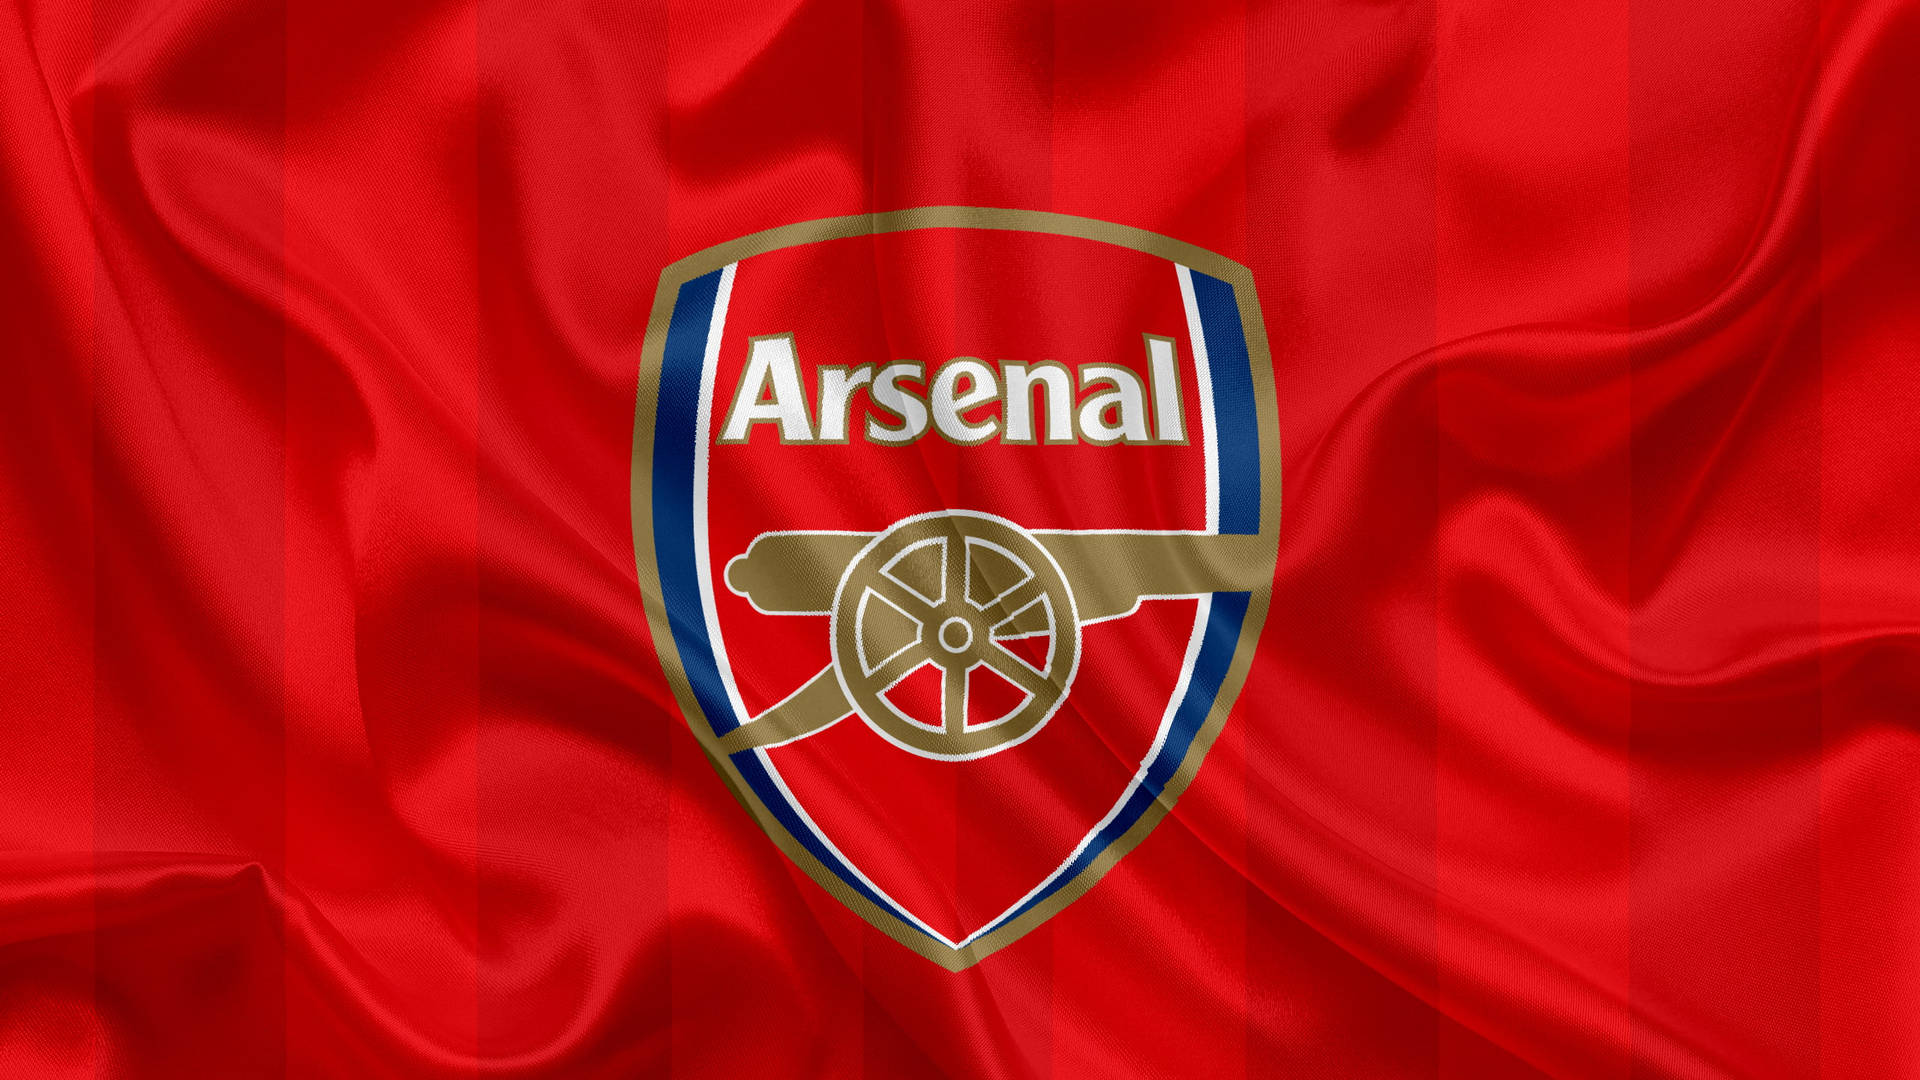 Arsenal Flag On Red Silk Background